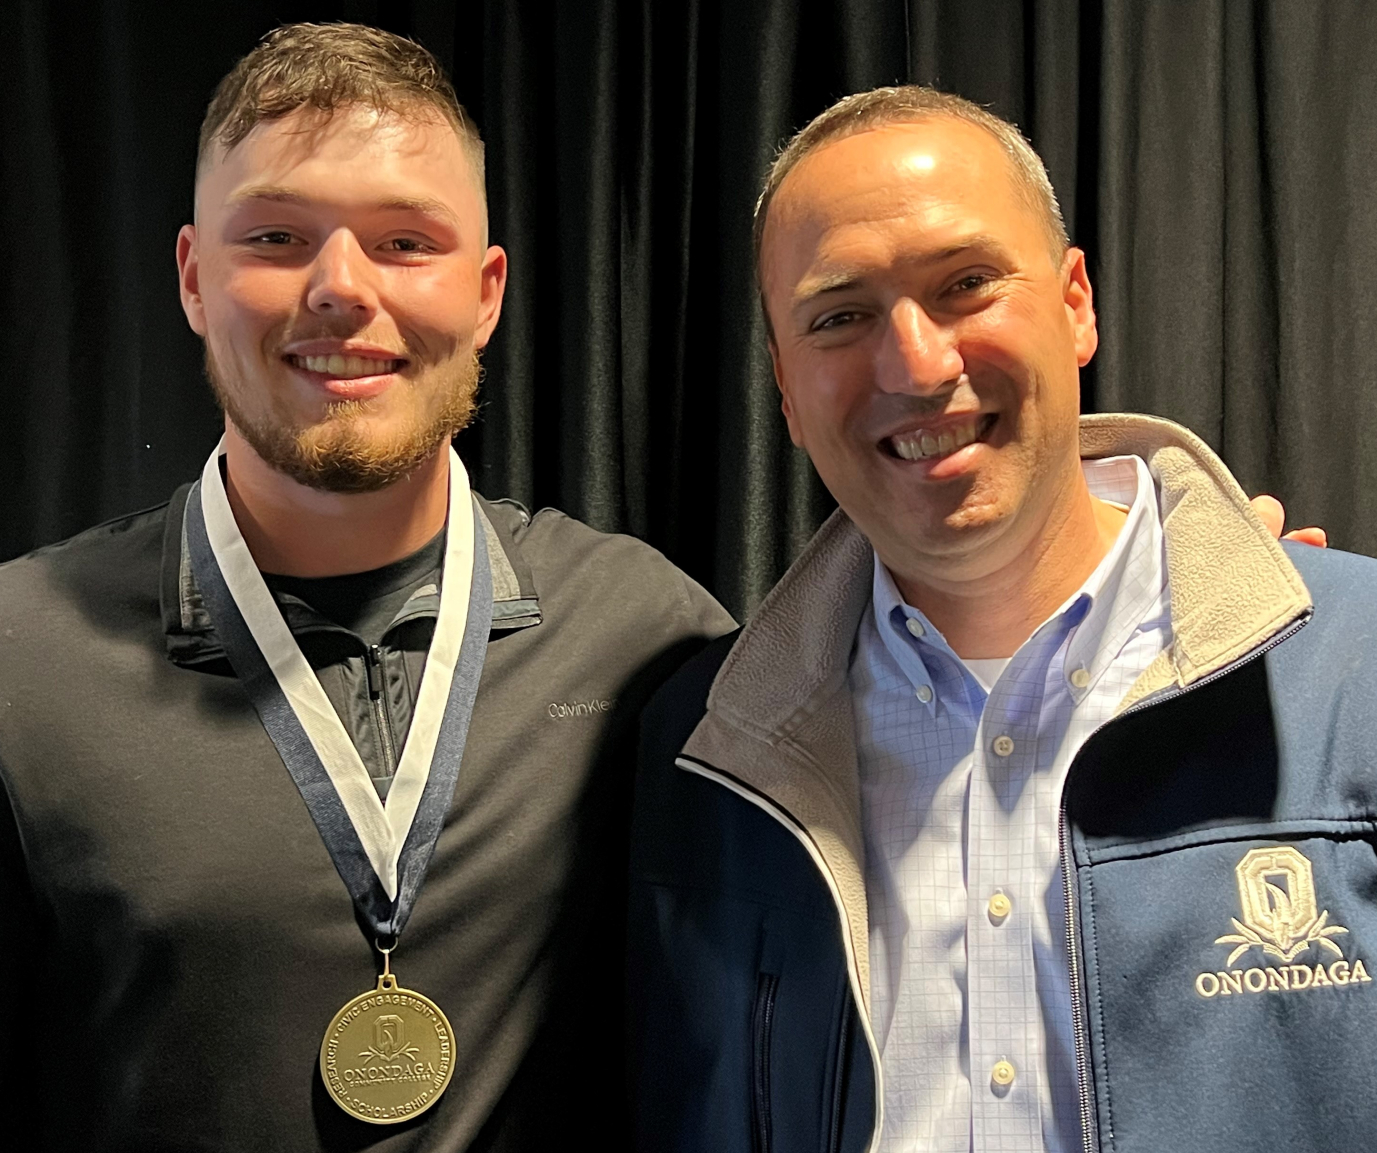 Jake Humes (left) and Director of Athletics Mike Borsz (right).